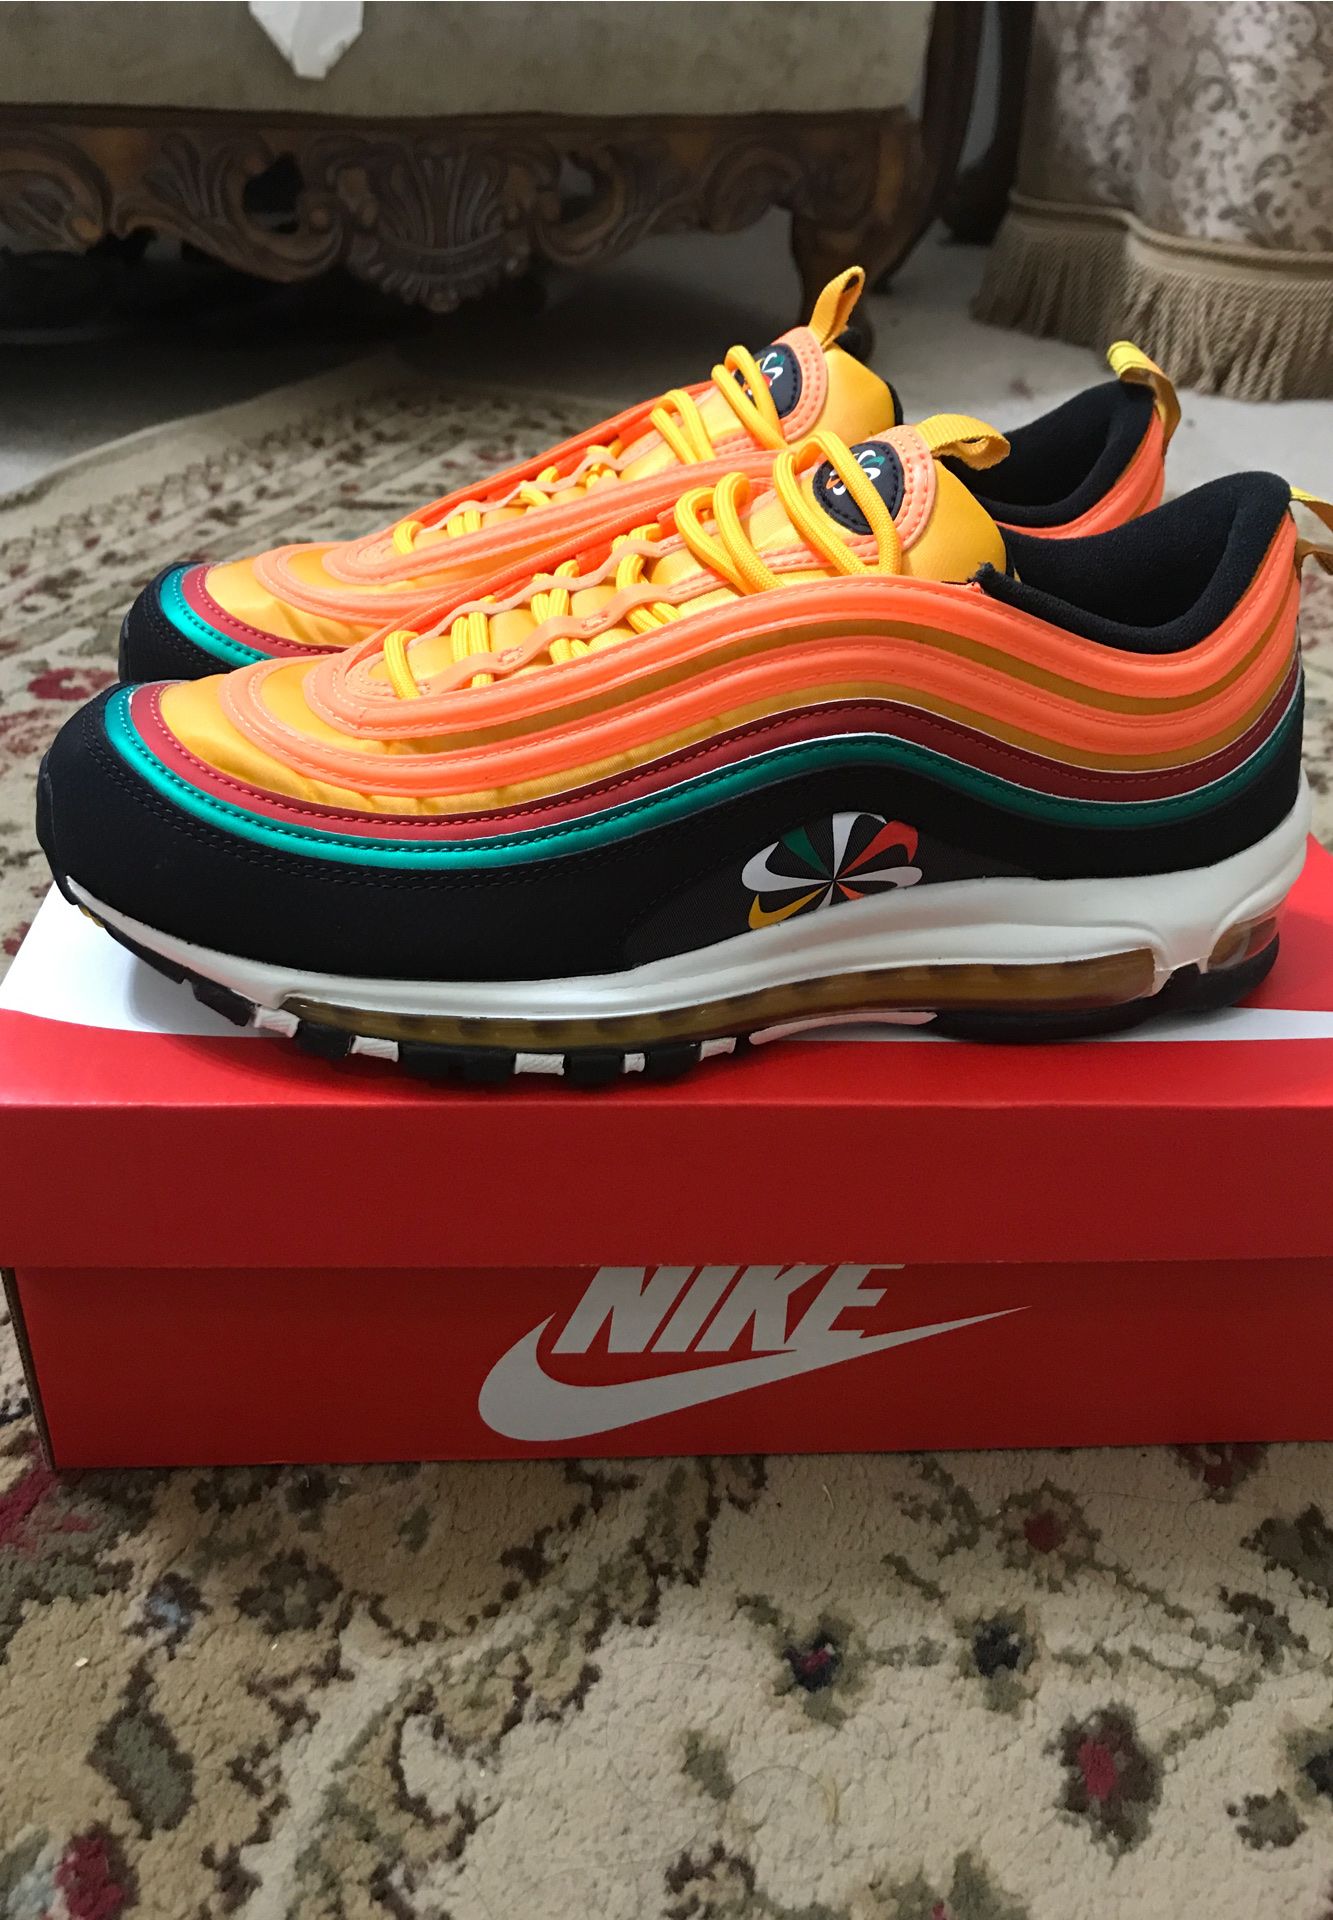 Nike air max 97 Sunburst color way I Men’s size 9.5 NEVER WORN BEFORE, Retail 170.00 putting for 170.00 but price is negotiable no low balls